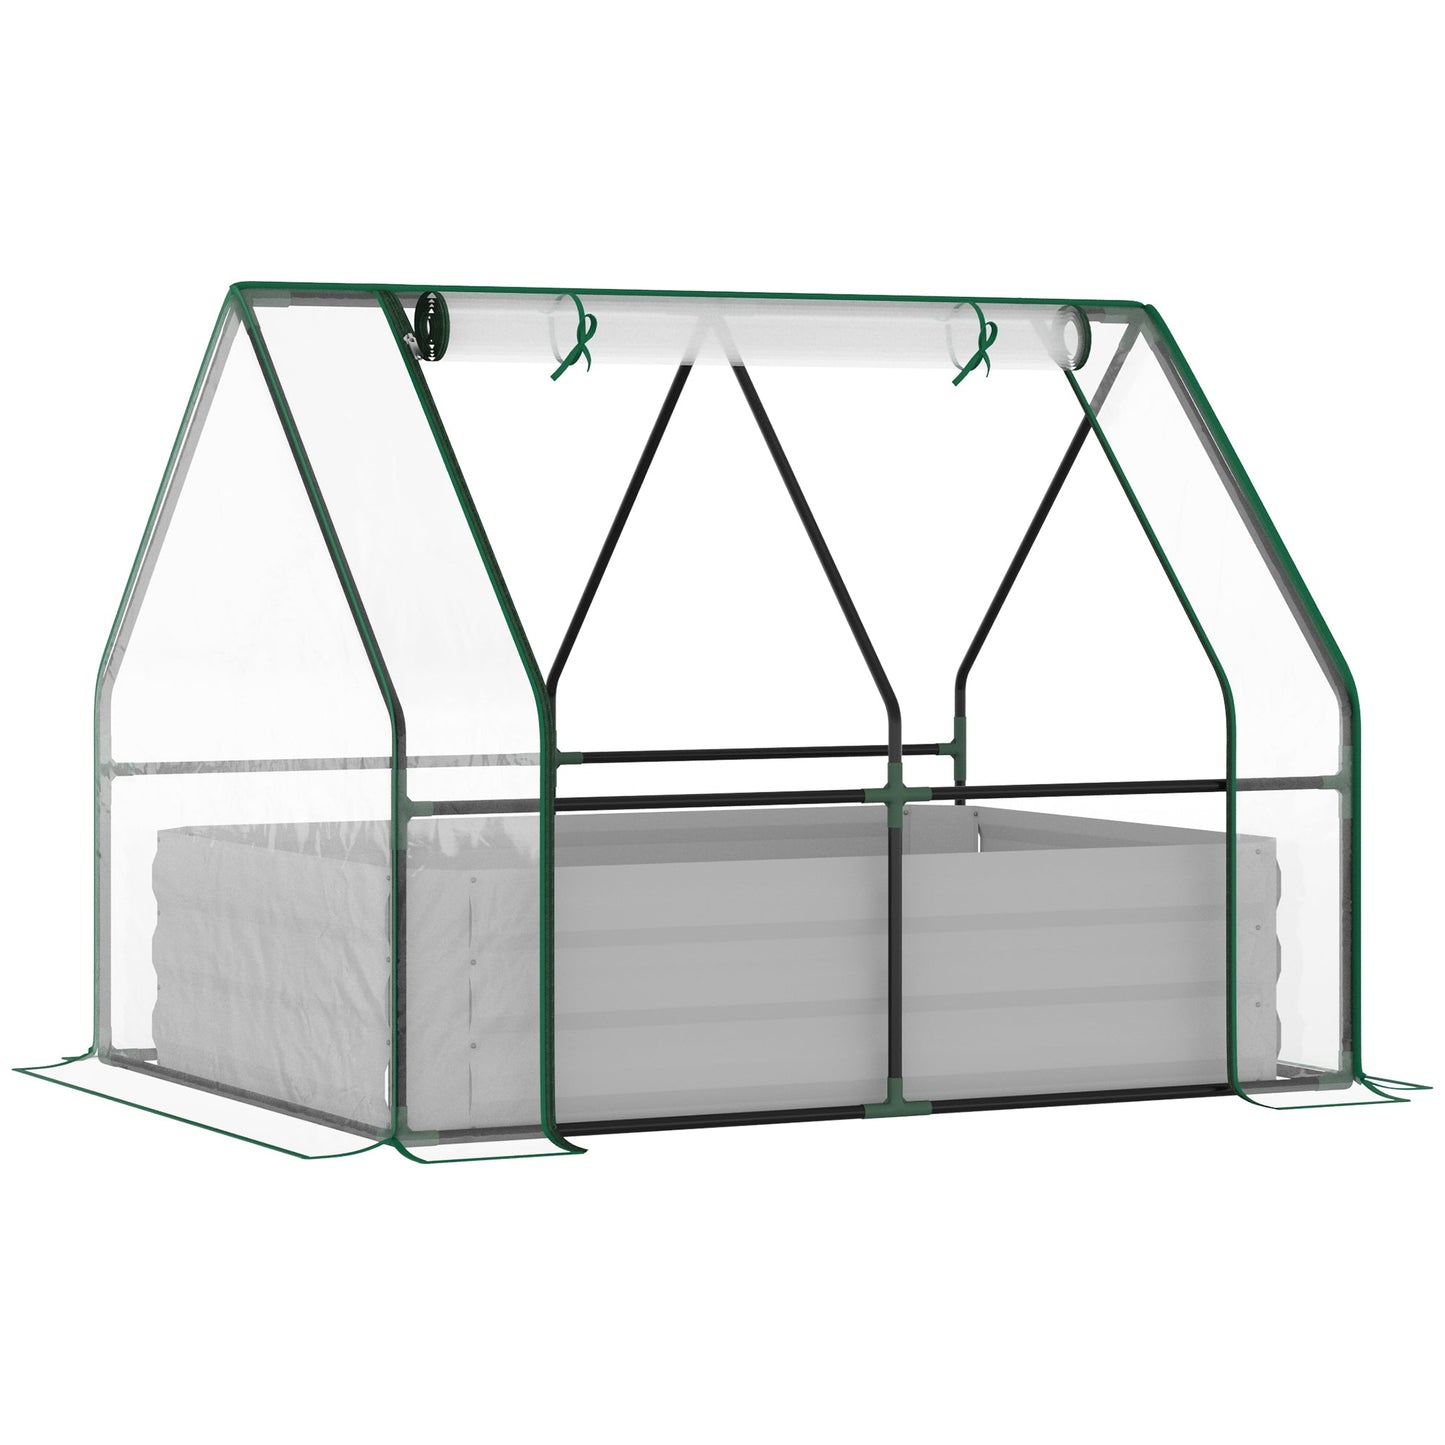 -Outsunny Raised Garden Bed with Greenhouse, Steel Outdoor Planter Box with Plastic Cover, Roll Up Window, Dual Use for Flowers, Vegetables, Clear - Outdoor Style Company